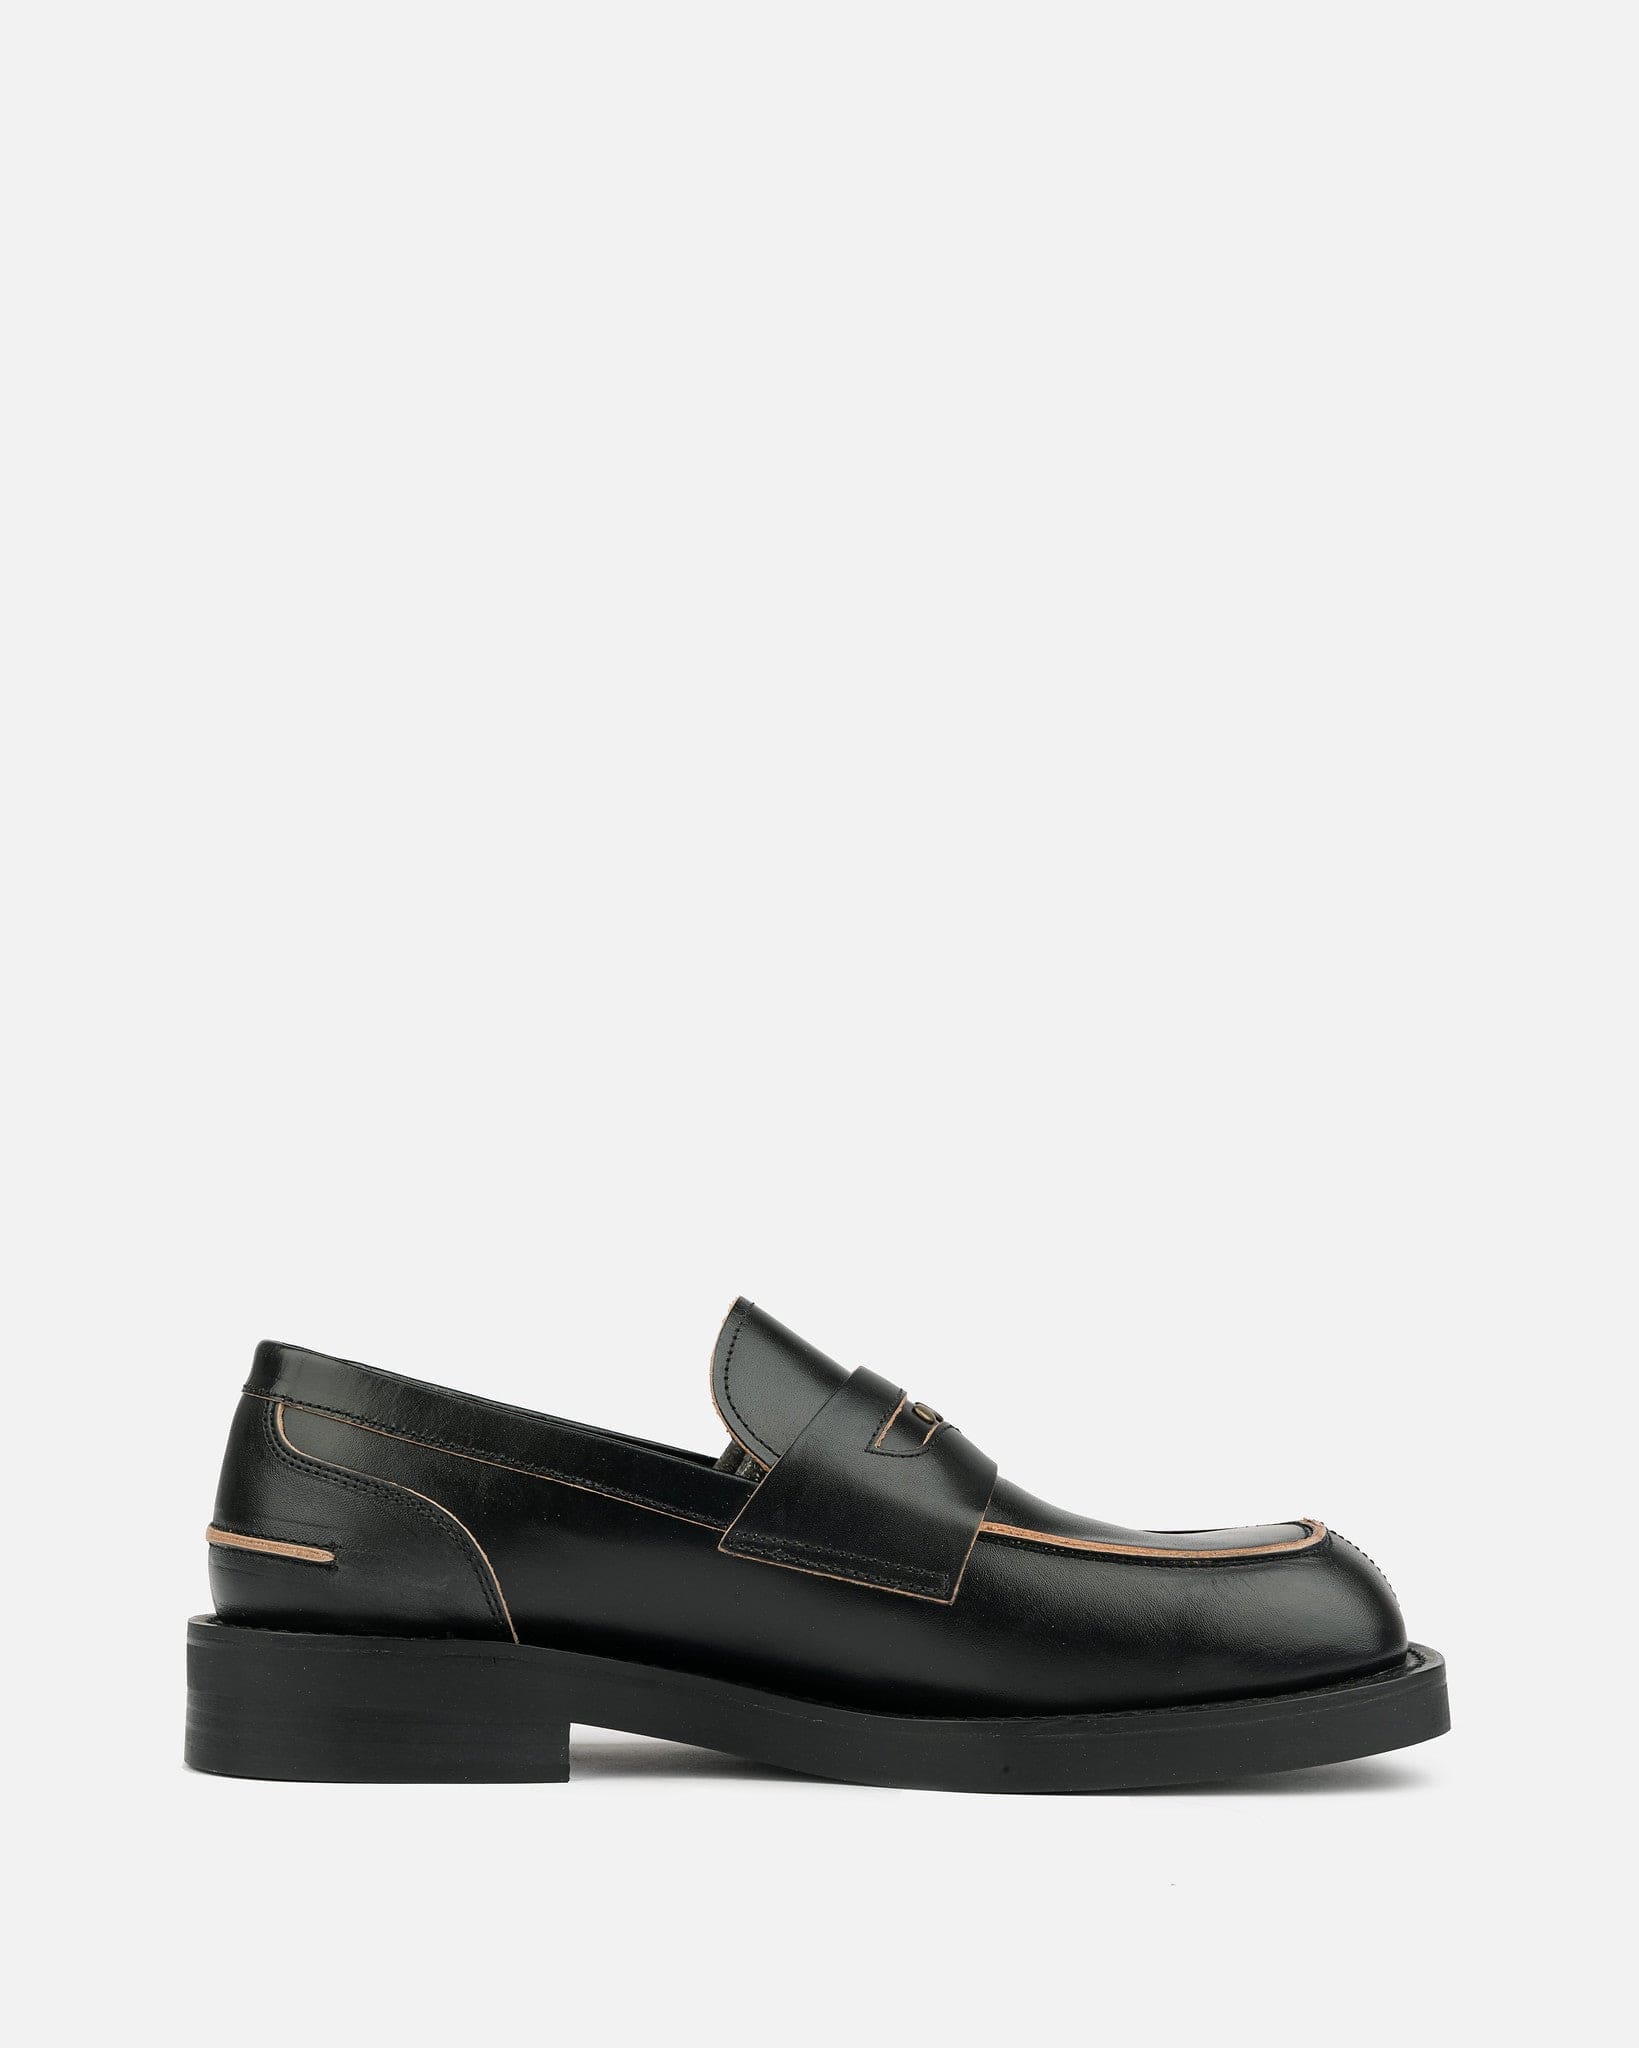 Andersson Bell Men's Shoes Broeils Penny Loafer in Black